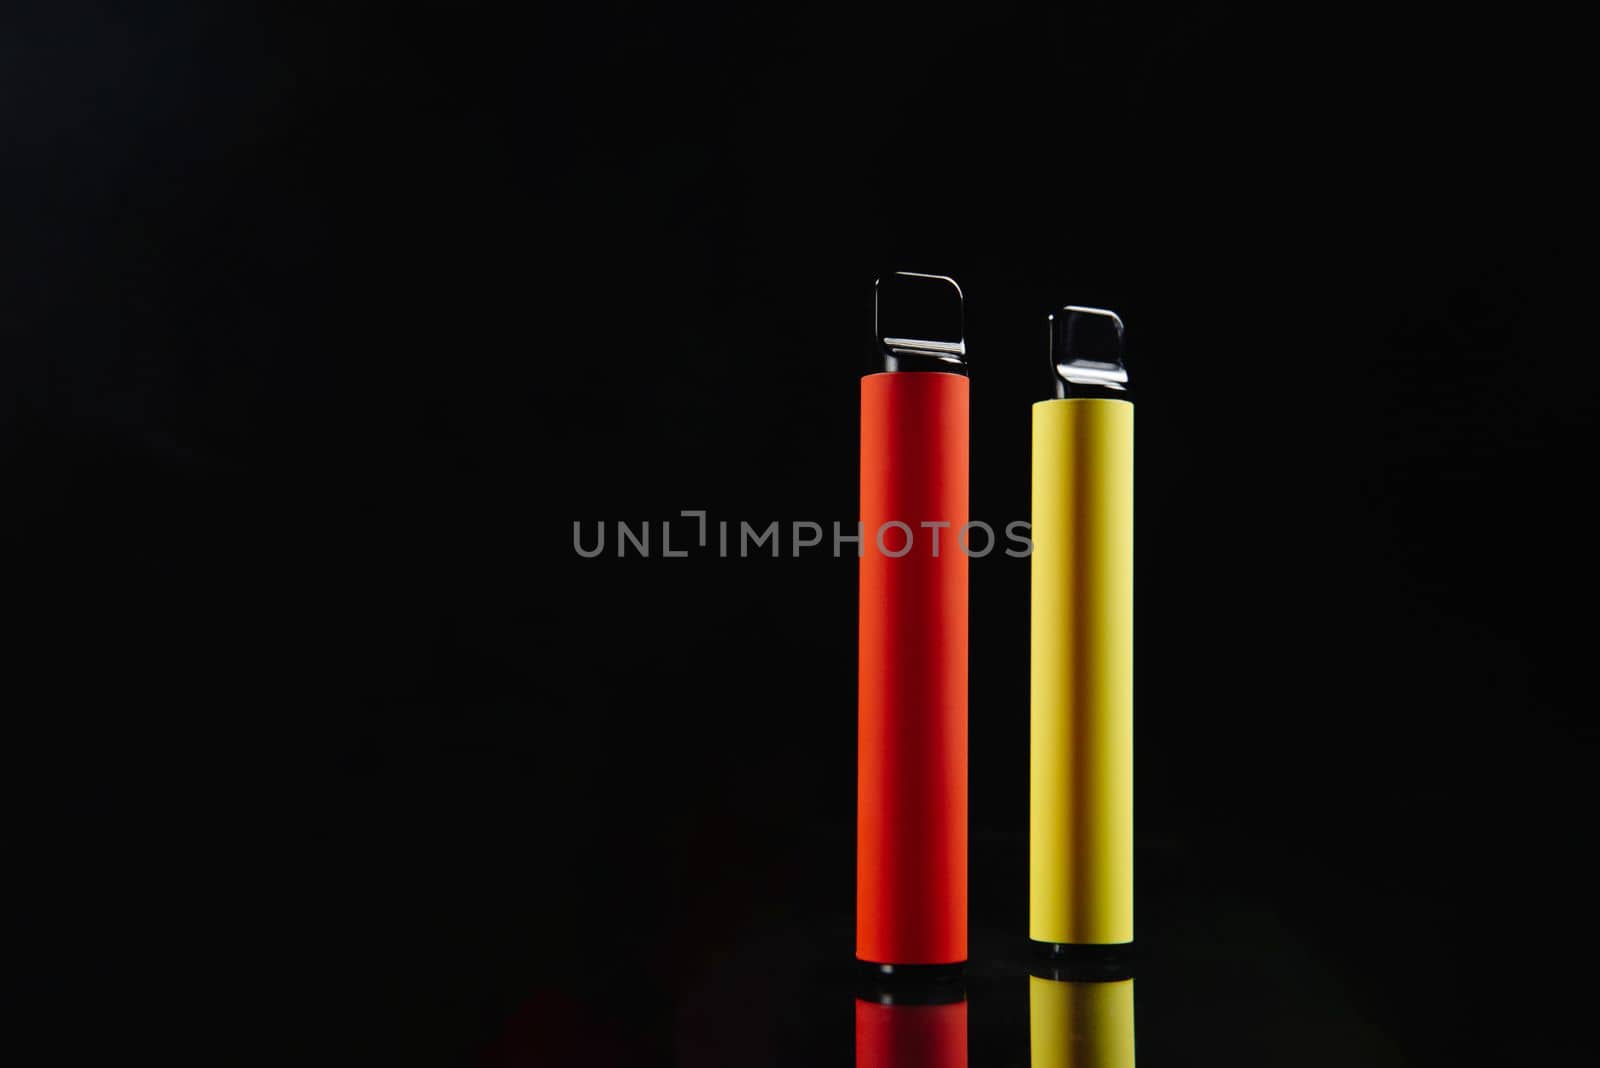 Two disposable e-cigarettes on a dark background. Electronic vape, an alternative to smoking cigarettes